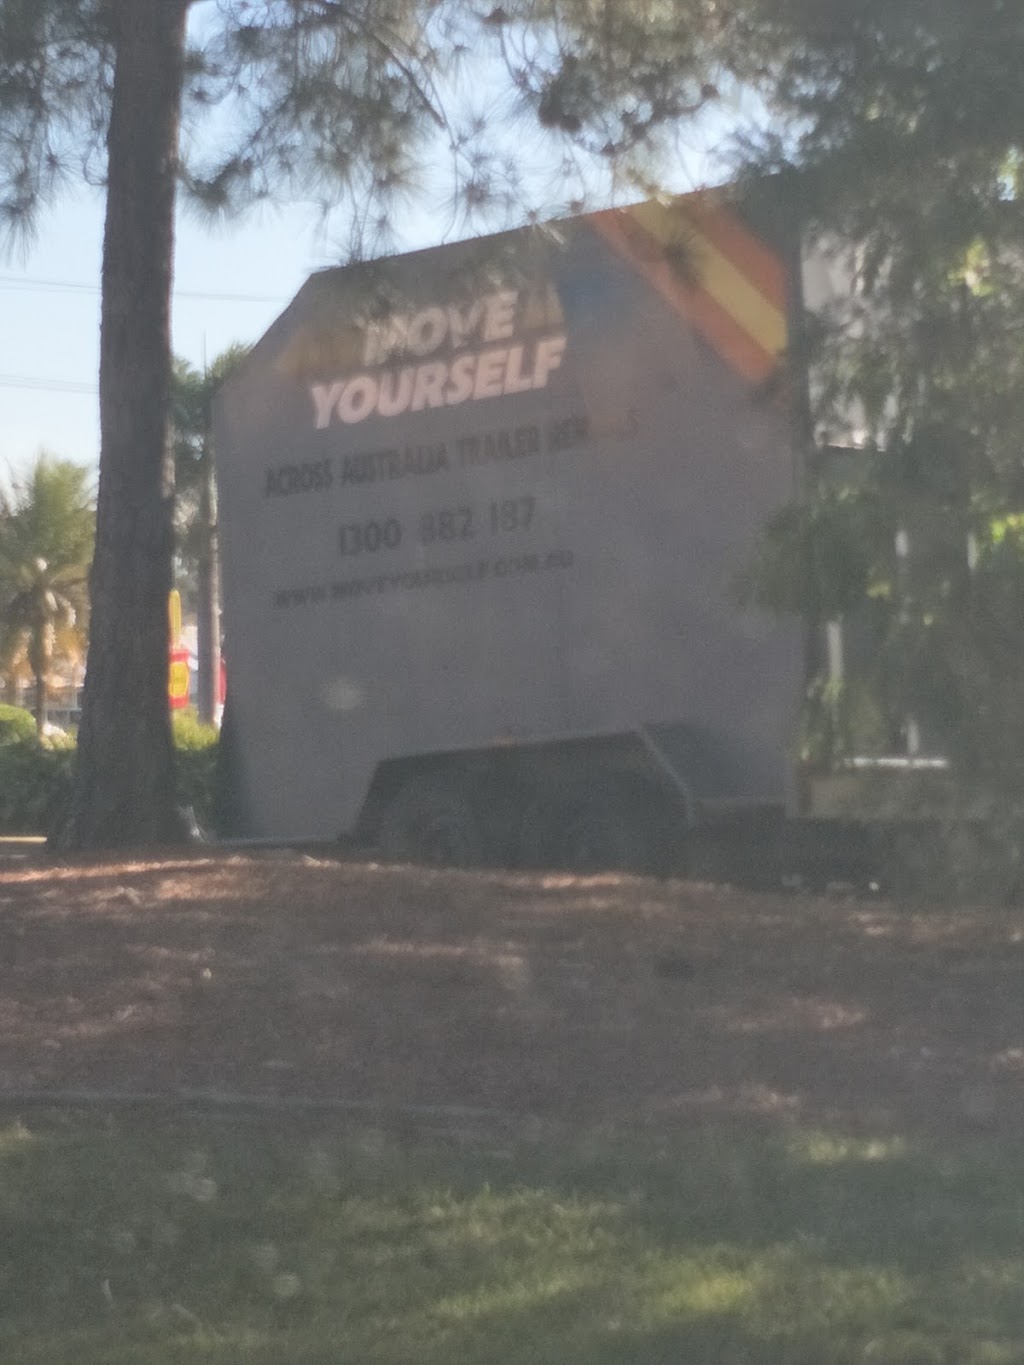 Move Yourself - Deception Bay QLD | store | 376Cnr Park &, Deception Bay Rd, Deception Bay QLD 4508, Australia | 1300882187 OR +61 1300 882 187